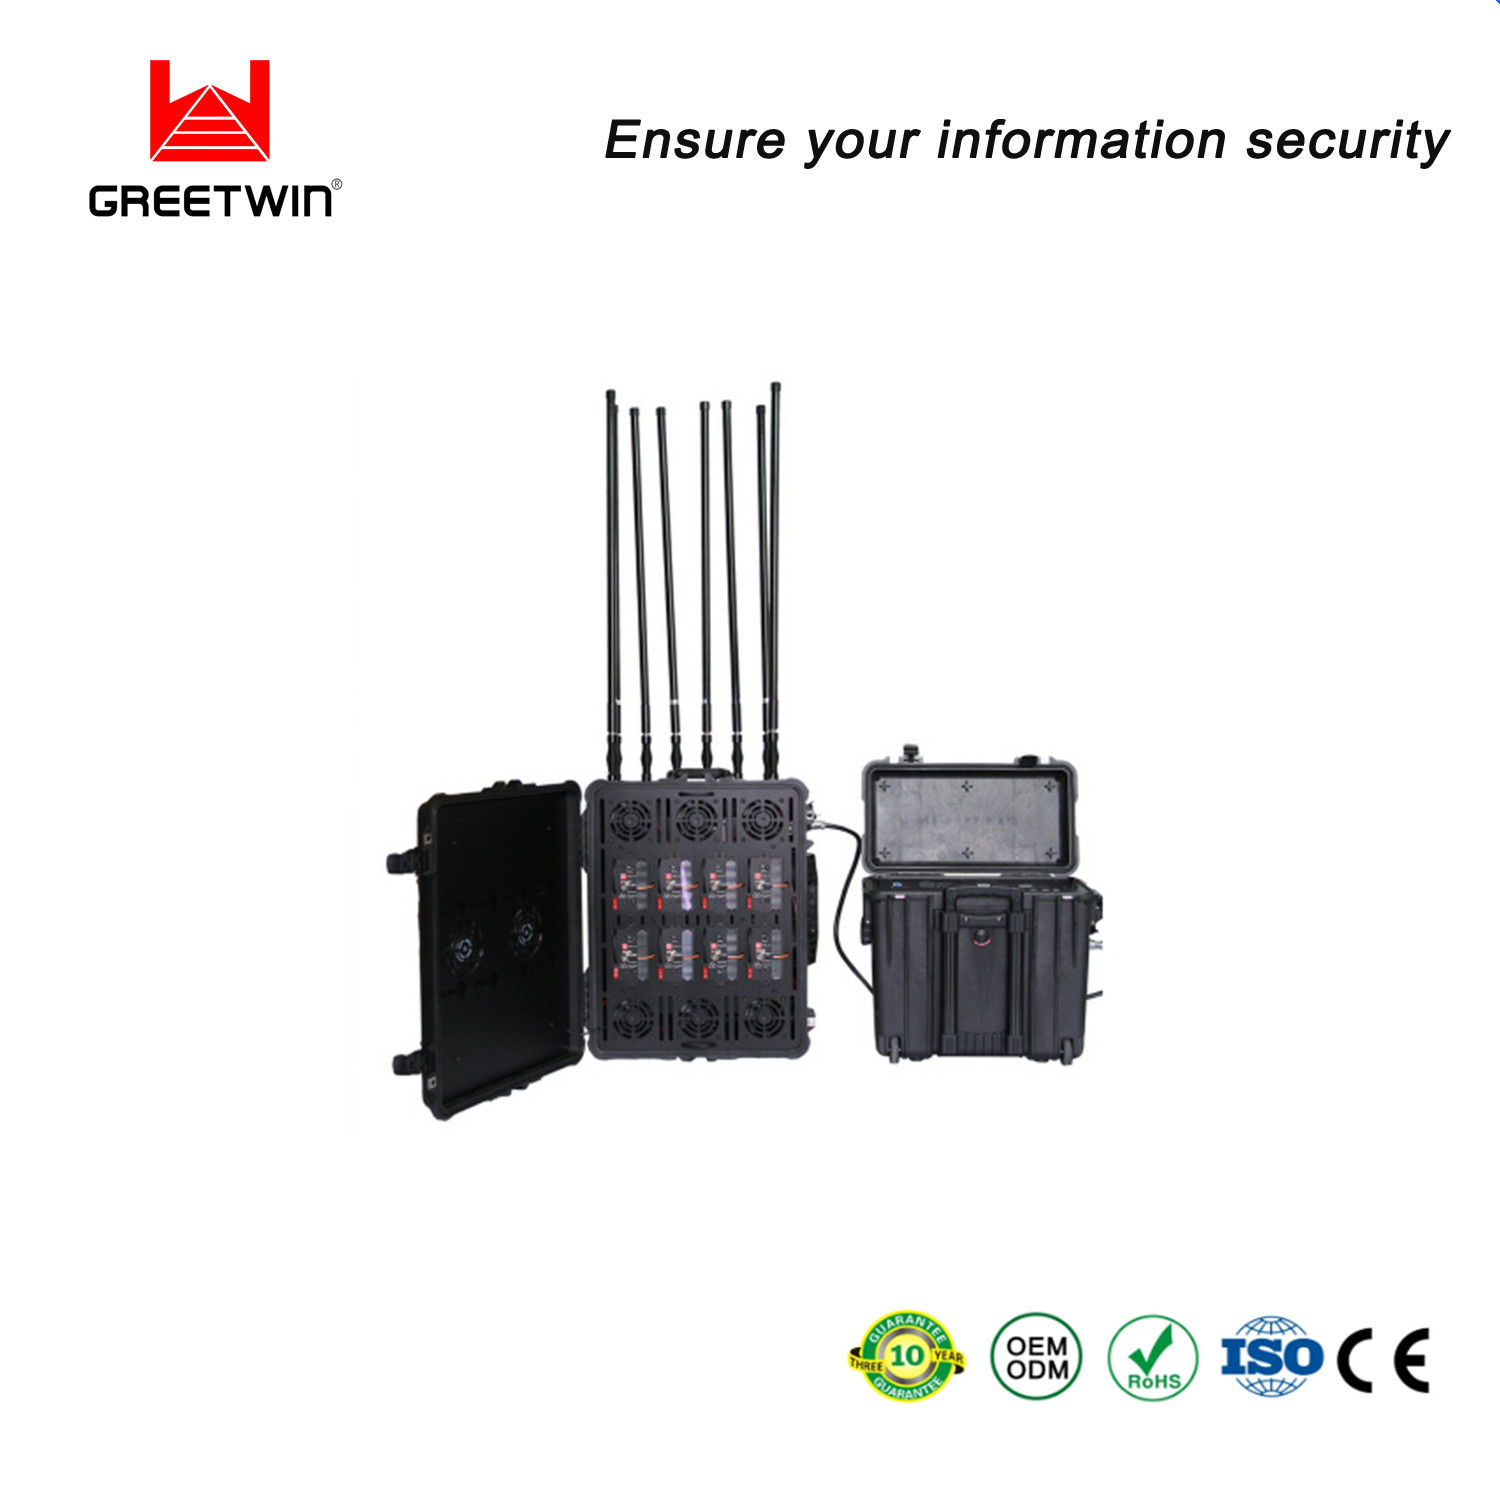 ps35156285-dds_360w_rj485_protocol_portable_phone_jammer_rcied_direct_digital_synthesize.jpg